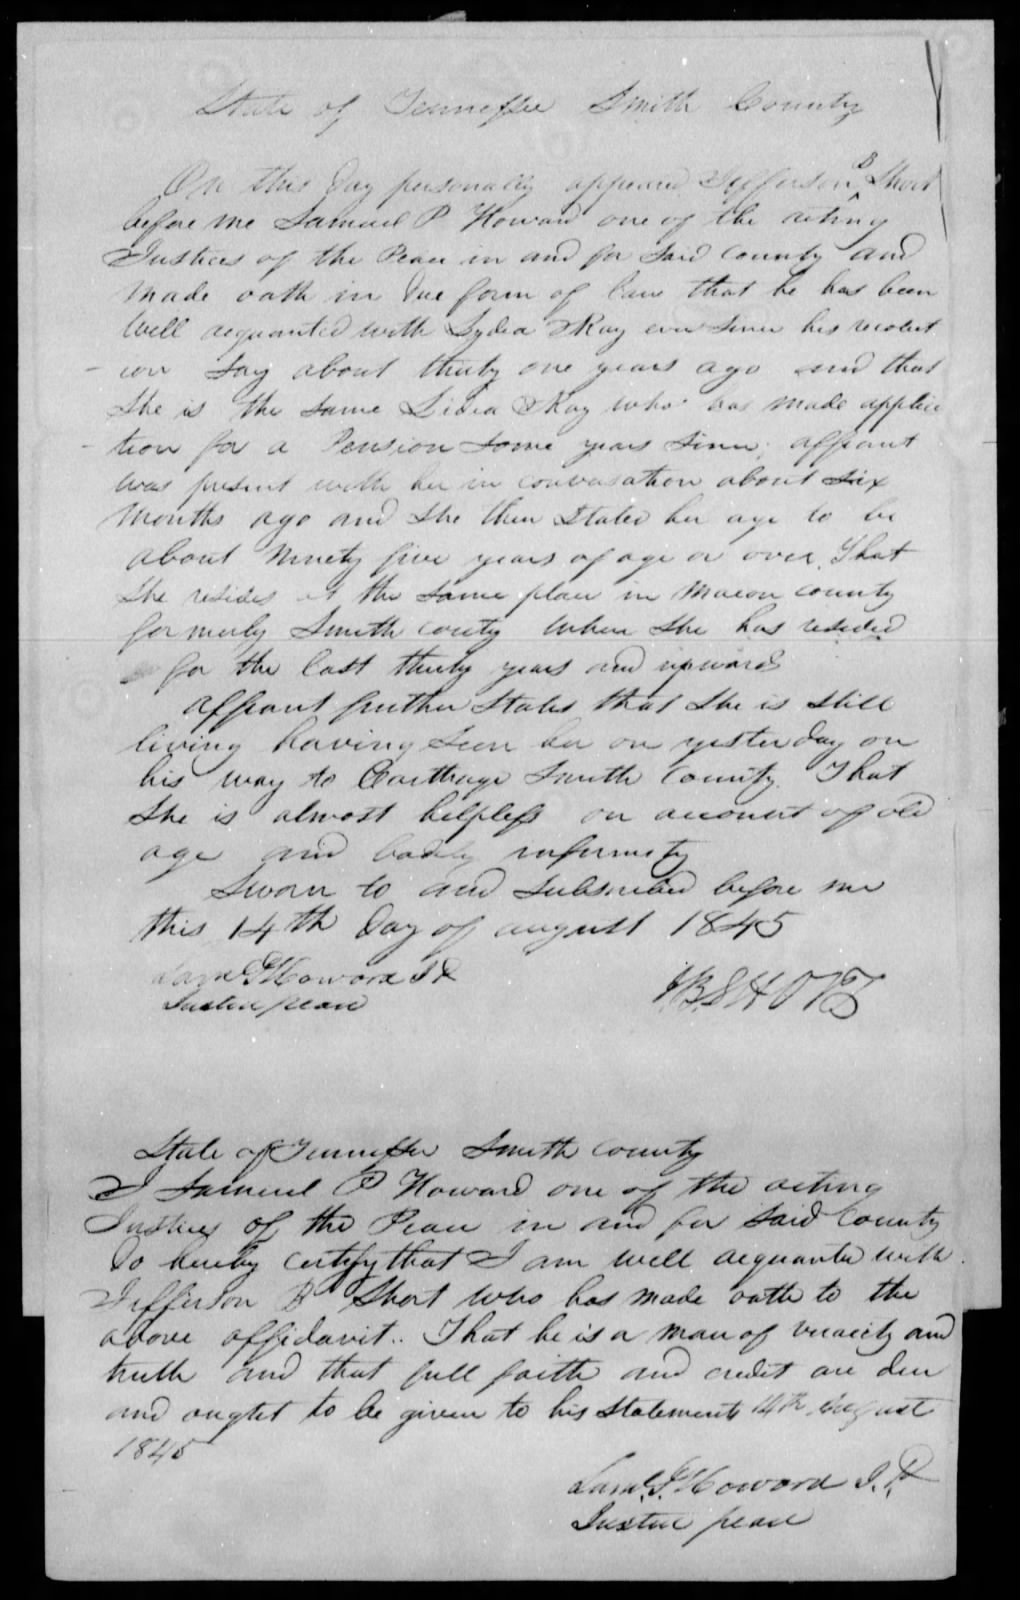 Affidavit of Jefferson B. Short in support of a Pension Claim for Lydia Ray, 14 August 1845, page 1